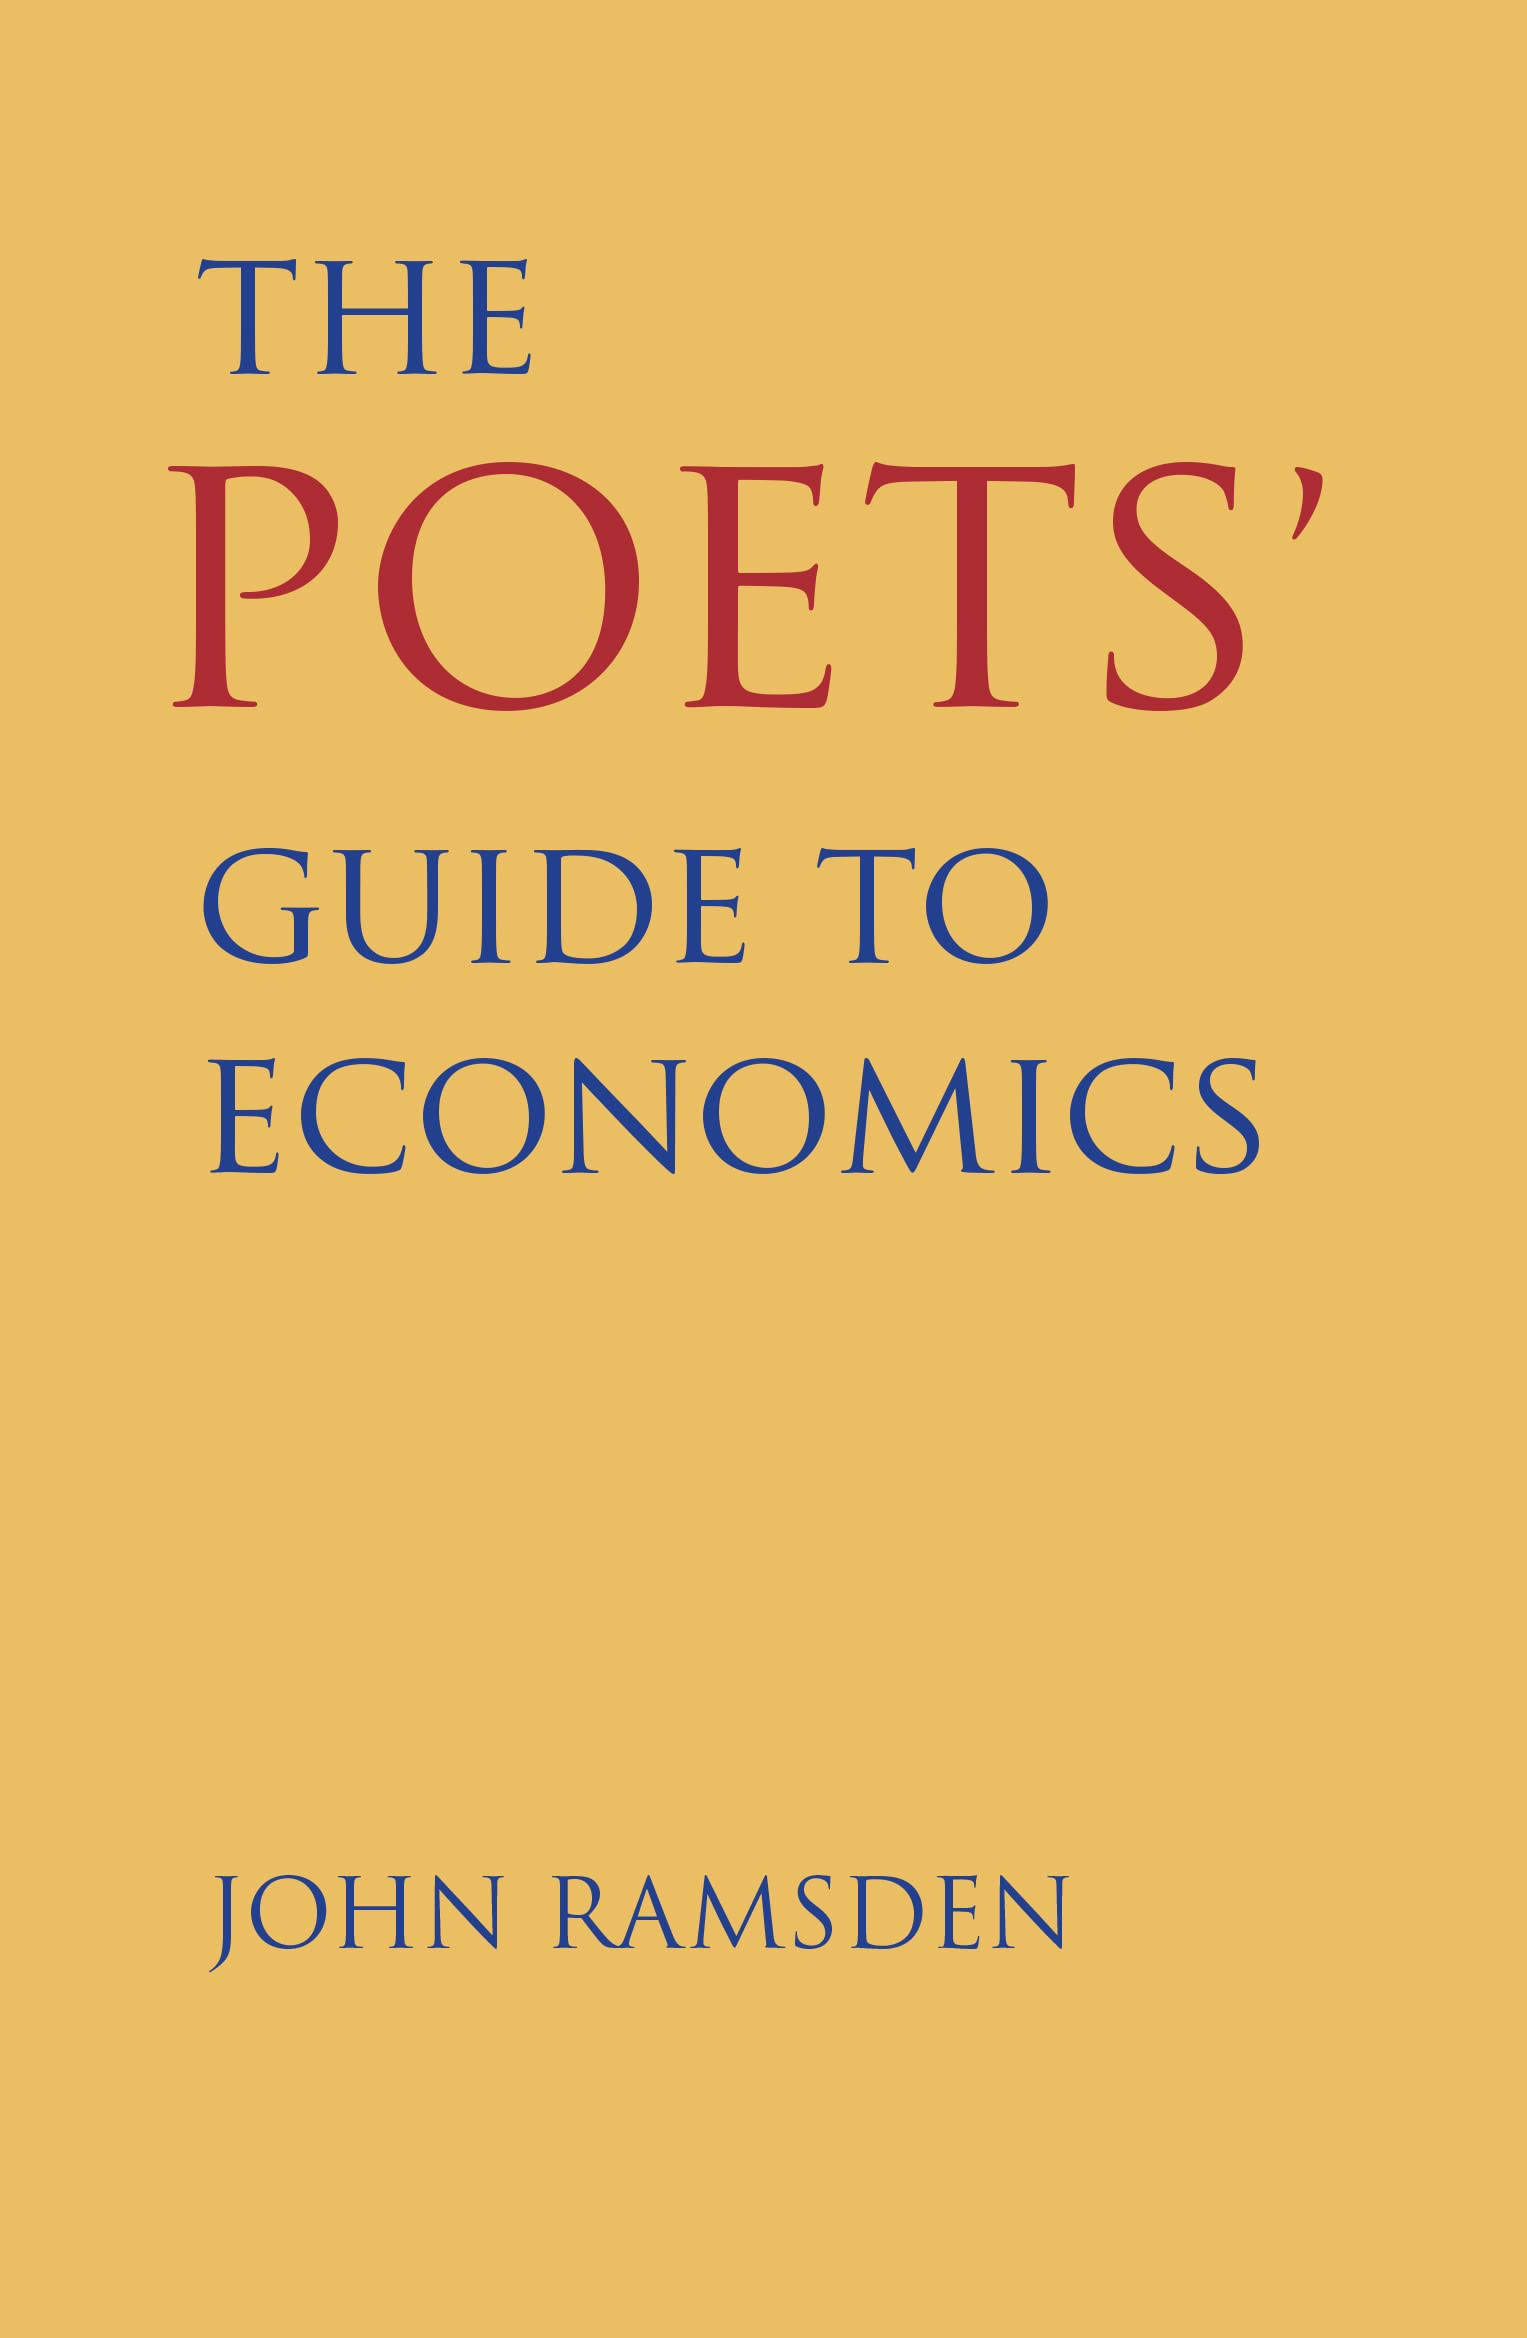 The Poets' Guide to Economics [Book]